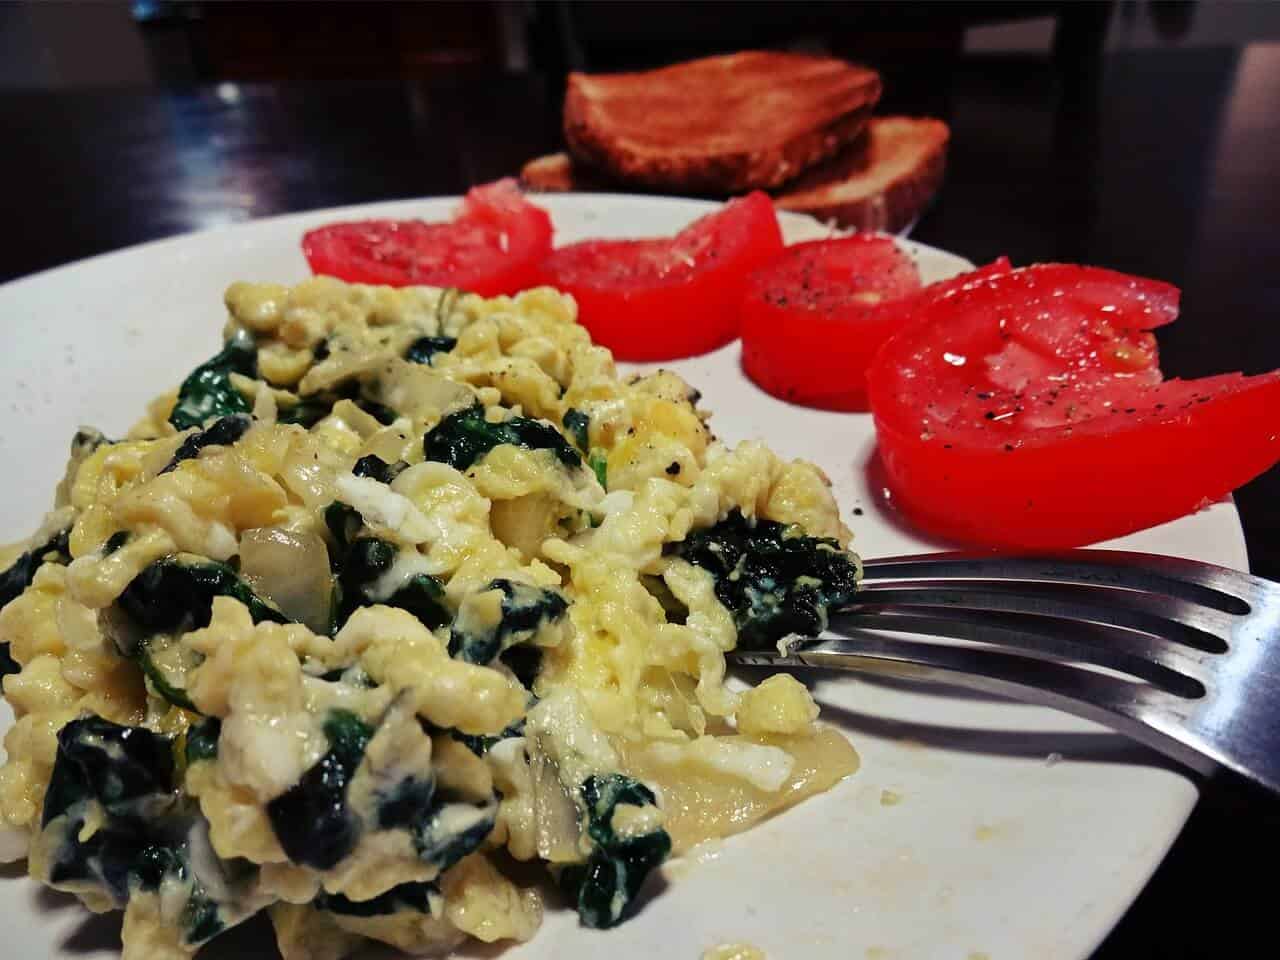 Scrambled Eggs with Mushrooms and Spinach